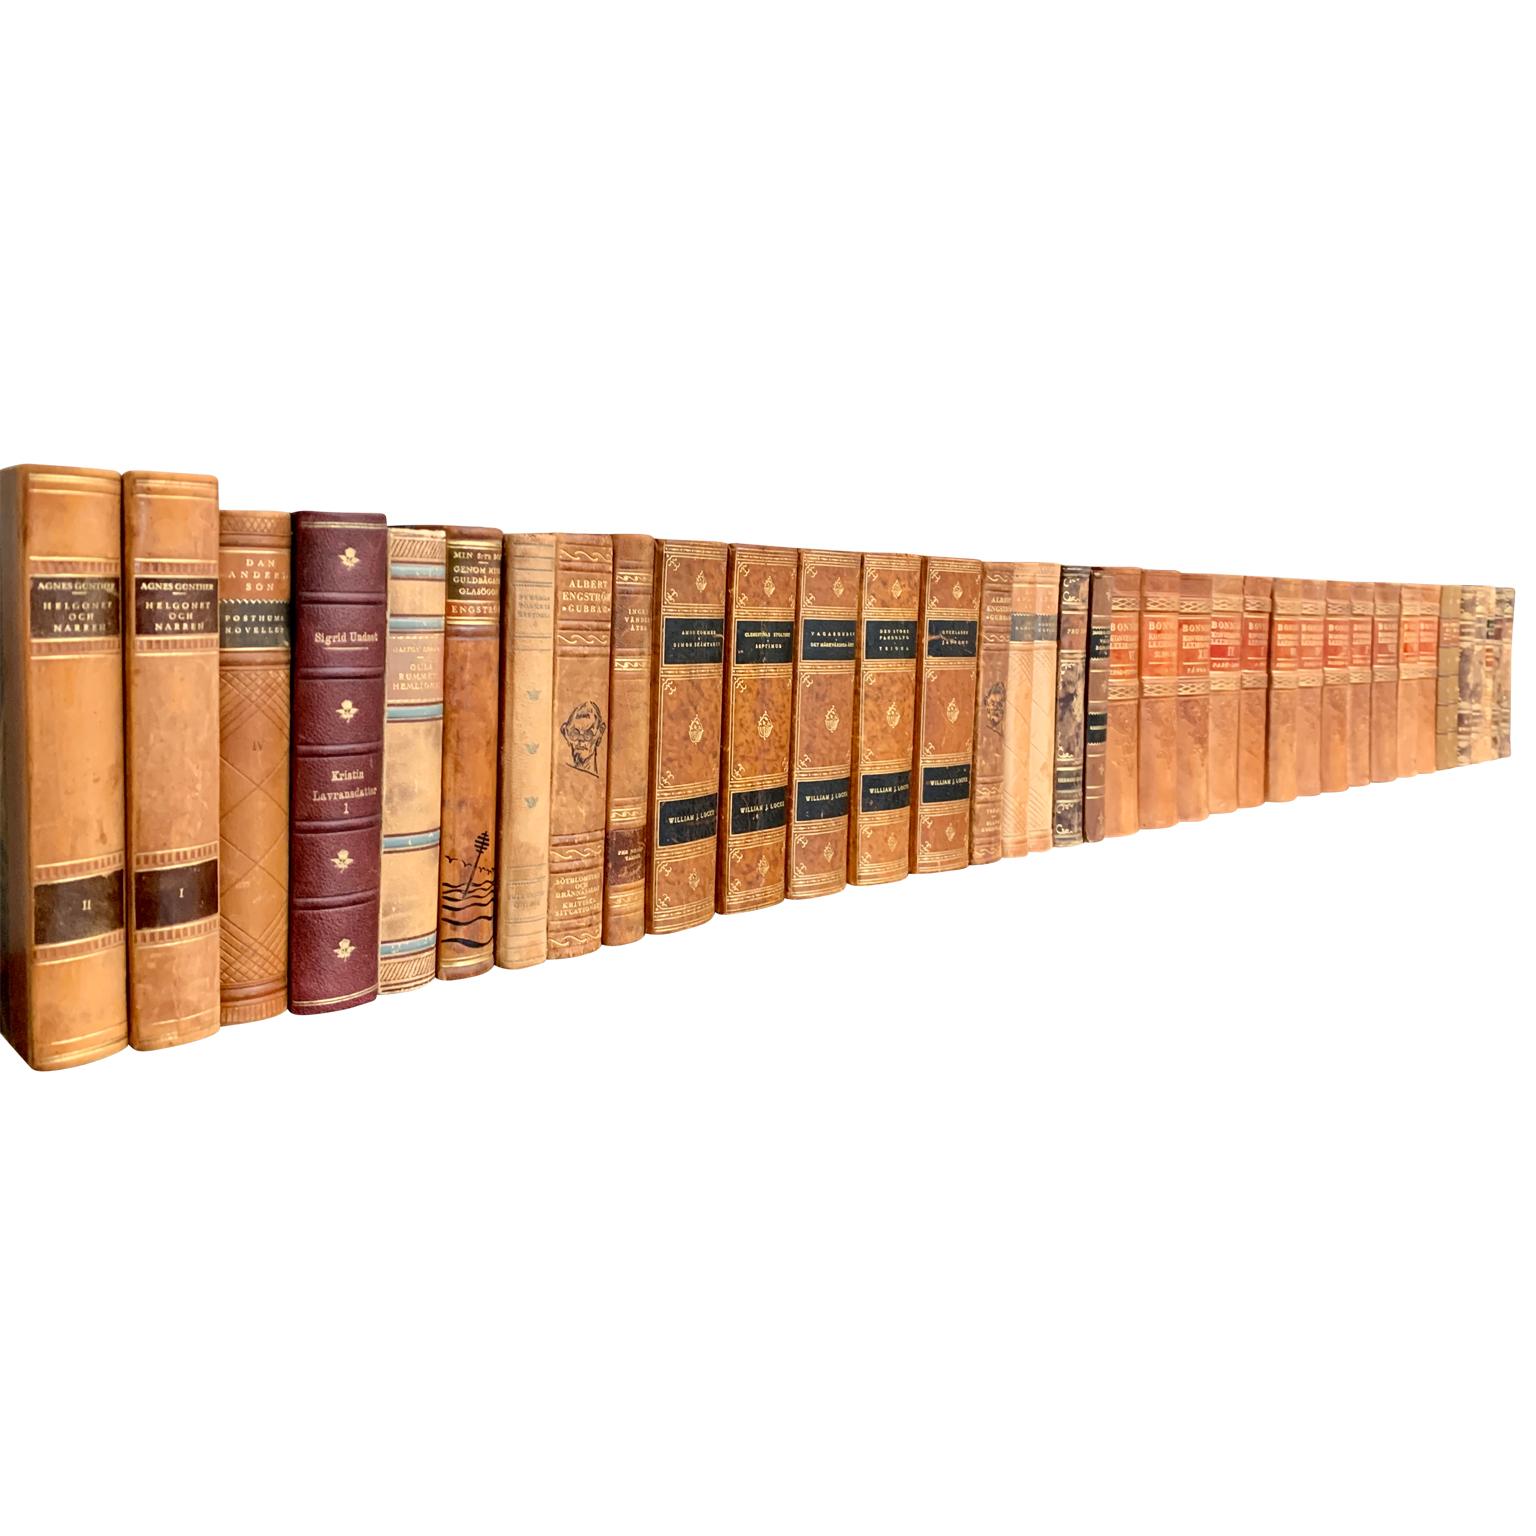 A collection of 38 Swedish decorative antique leather-bound library books

This lot of books on literature from Sweden are wrapped in beautiful vintage leather-bound covers, comprised of a selection of warm tones and gold leaf print embossing. The